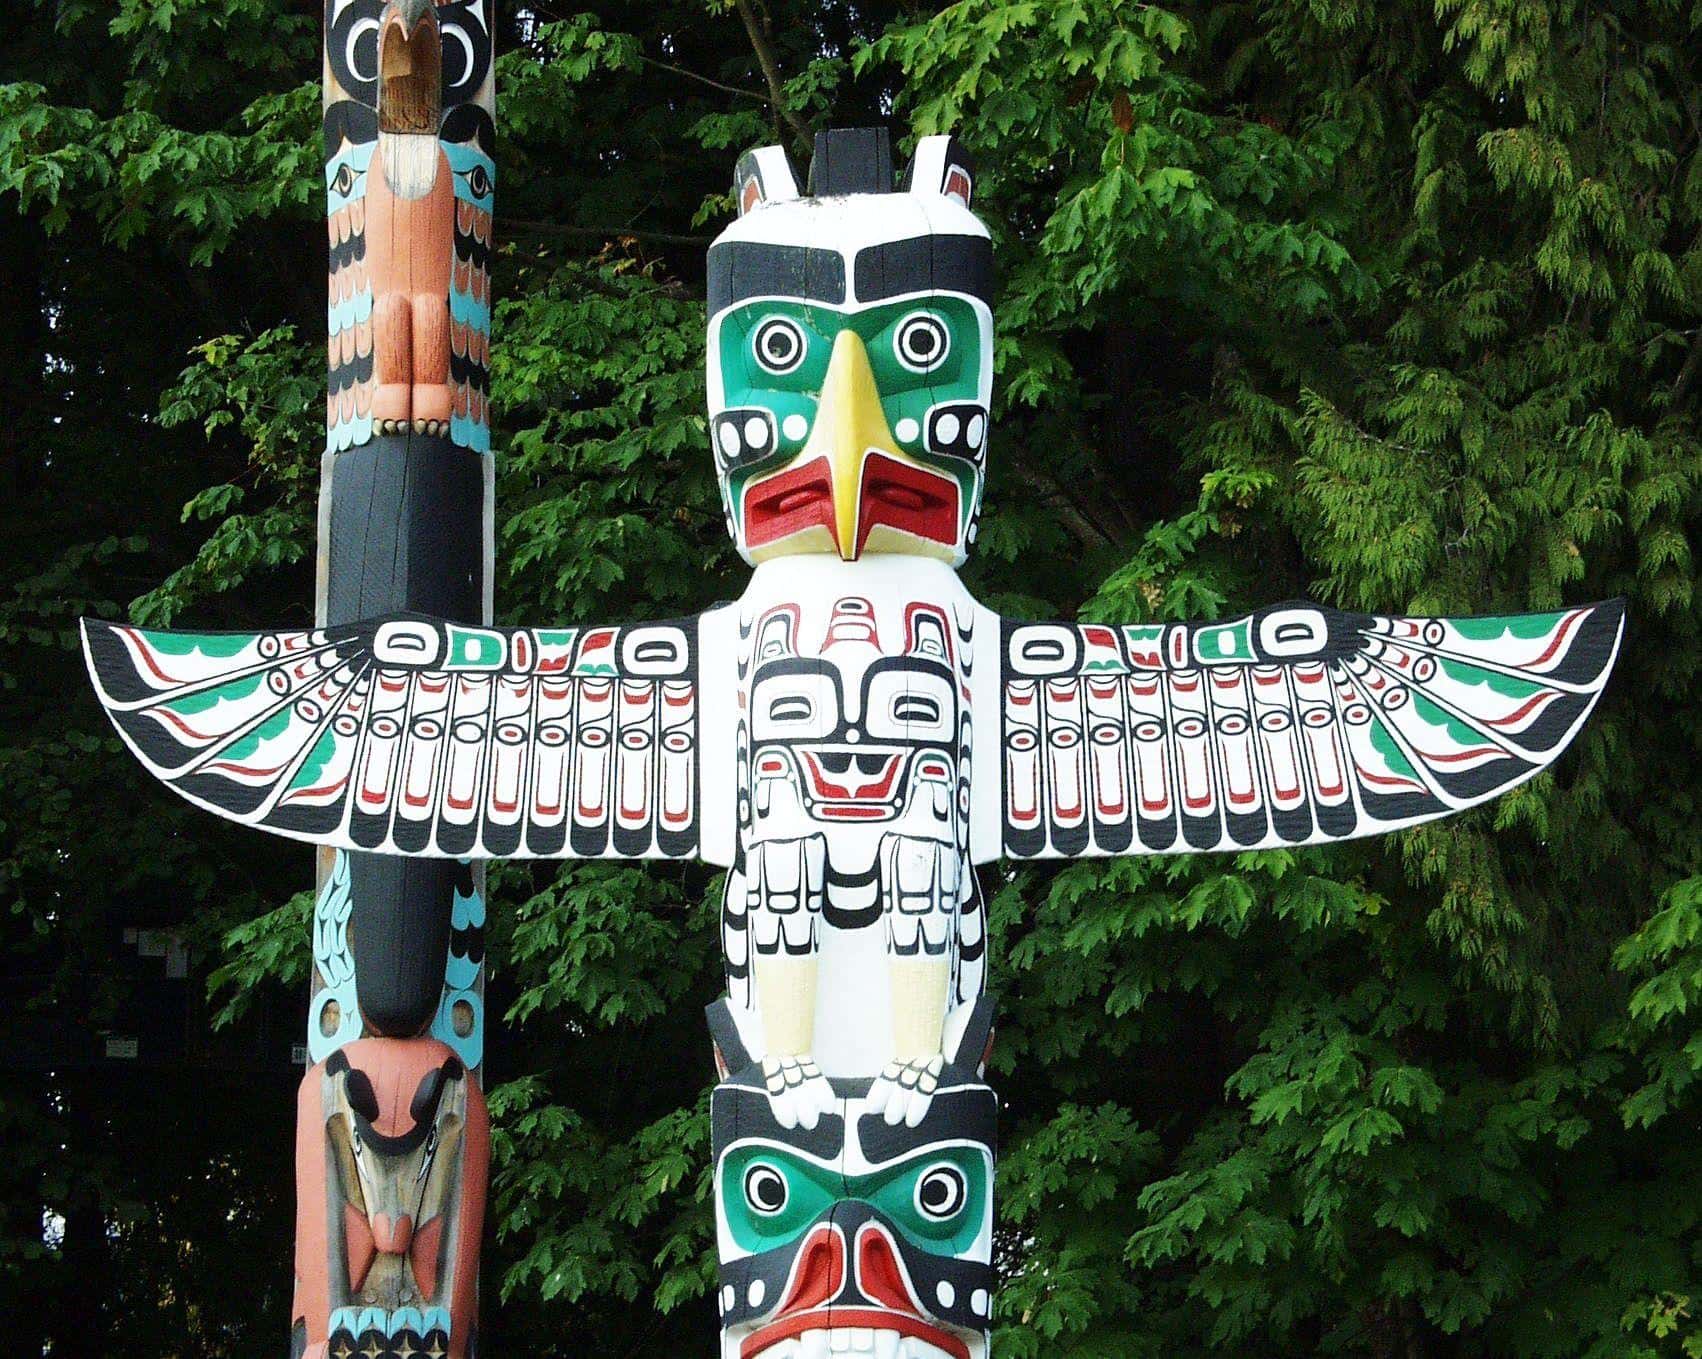 totem pole output what is